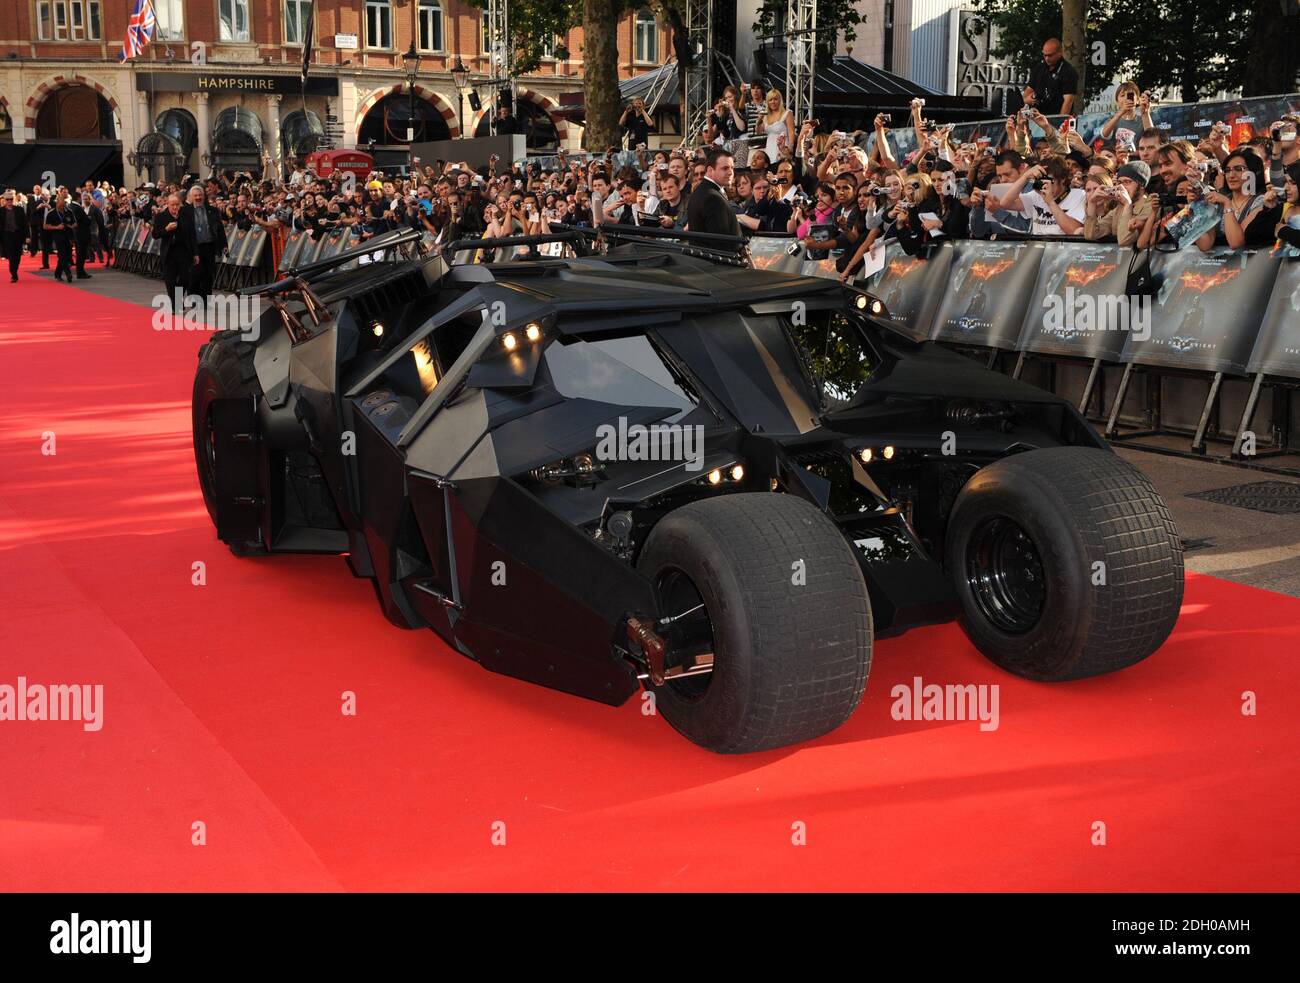 https://c8.alamy.com/comp/2DH0AMH/the-batmobile-arriving-at-the-european-premiere-of-the-dark-knight-the-latest-batman-film-odeon-cinema-leicester-square-london-2DH0AMH.jpg